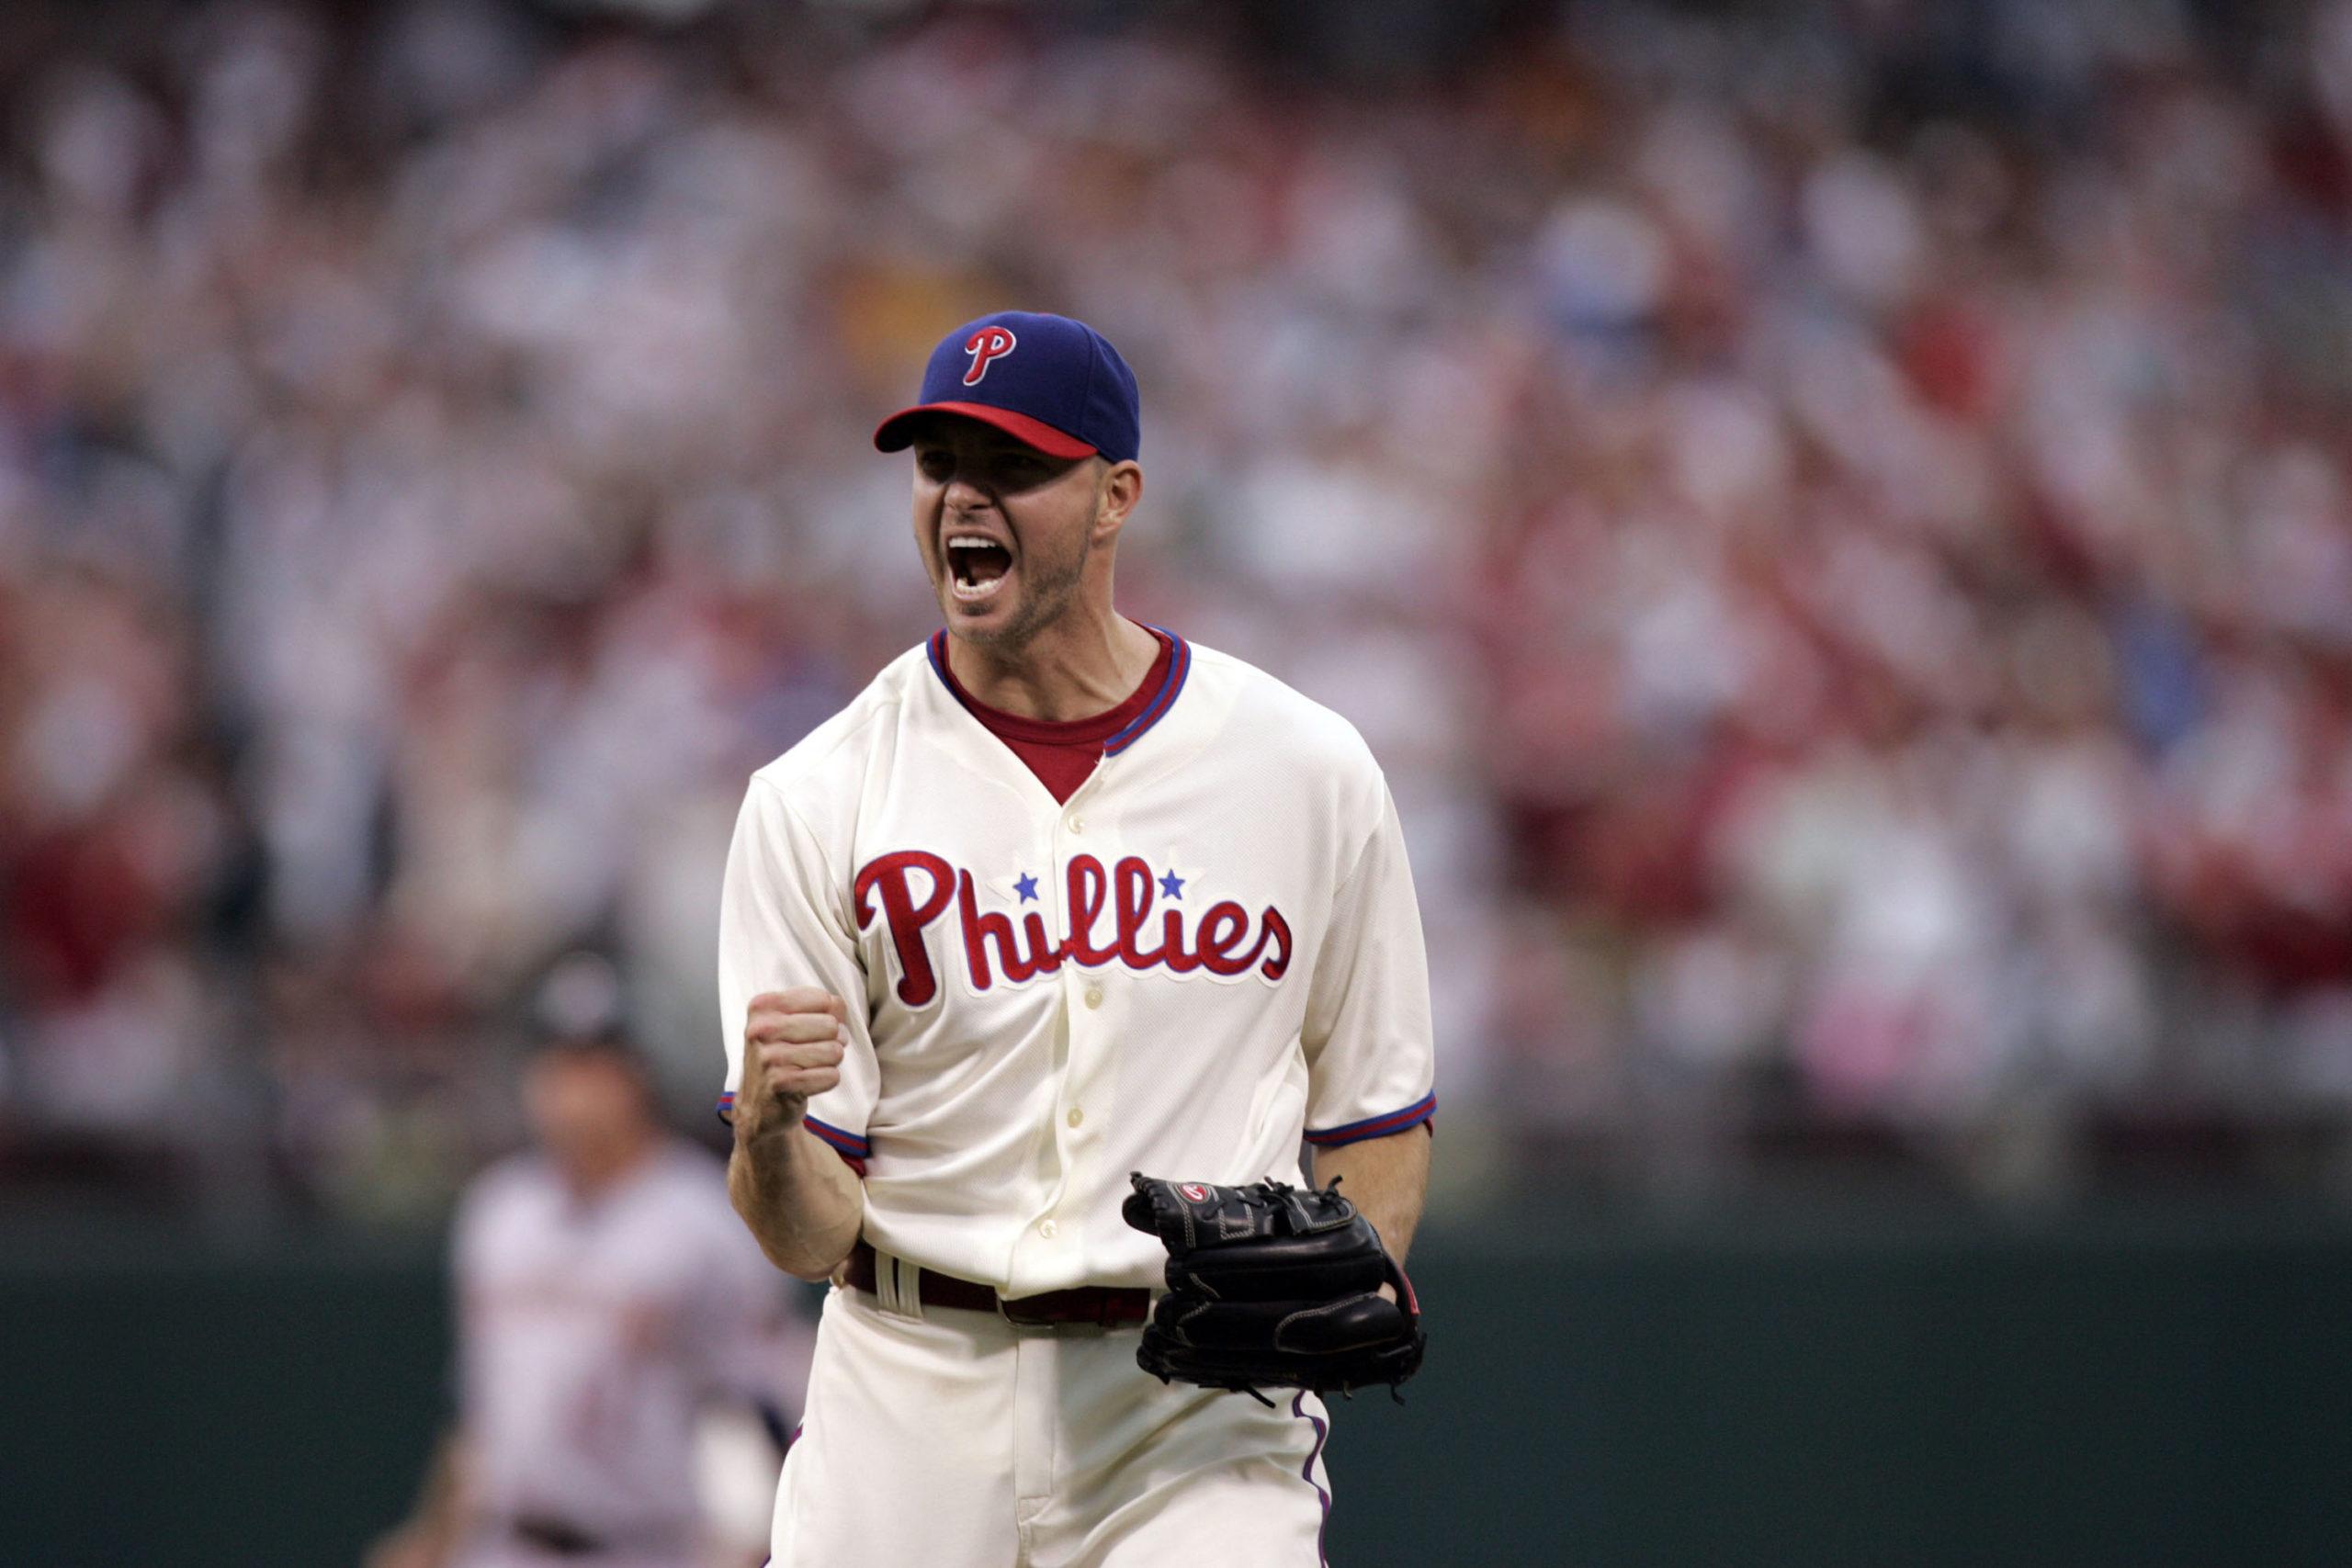 Philadelphia Phillies Ryan Madson celebrates after he closed out the eighth inning against the Washington Nationals at Lincoln Financial Field in Philadelphia, Pennsylvania, on Saturday, September 27, 2008. The Phillies clinched the NL East title after defeating the Washington Nationals 4-3. (Michael Perez/Philadelphia Inquirer/MCT)